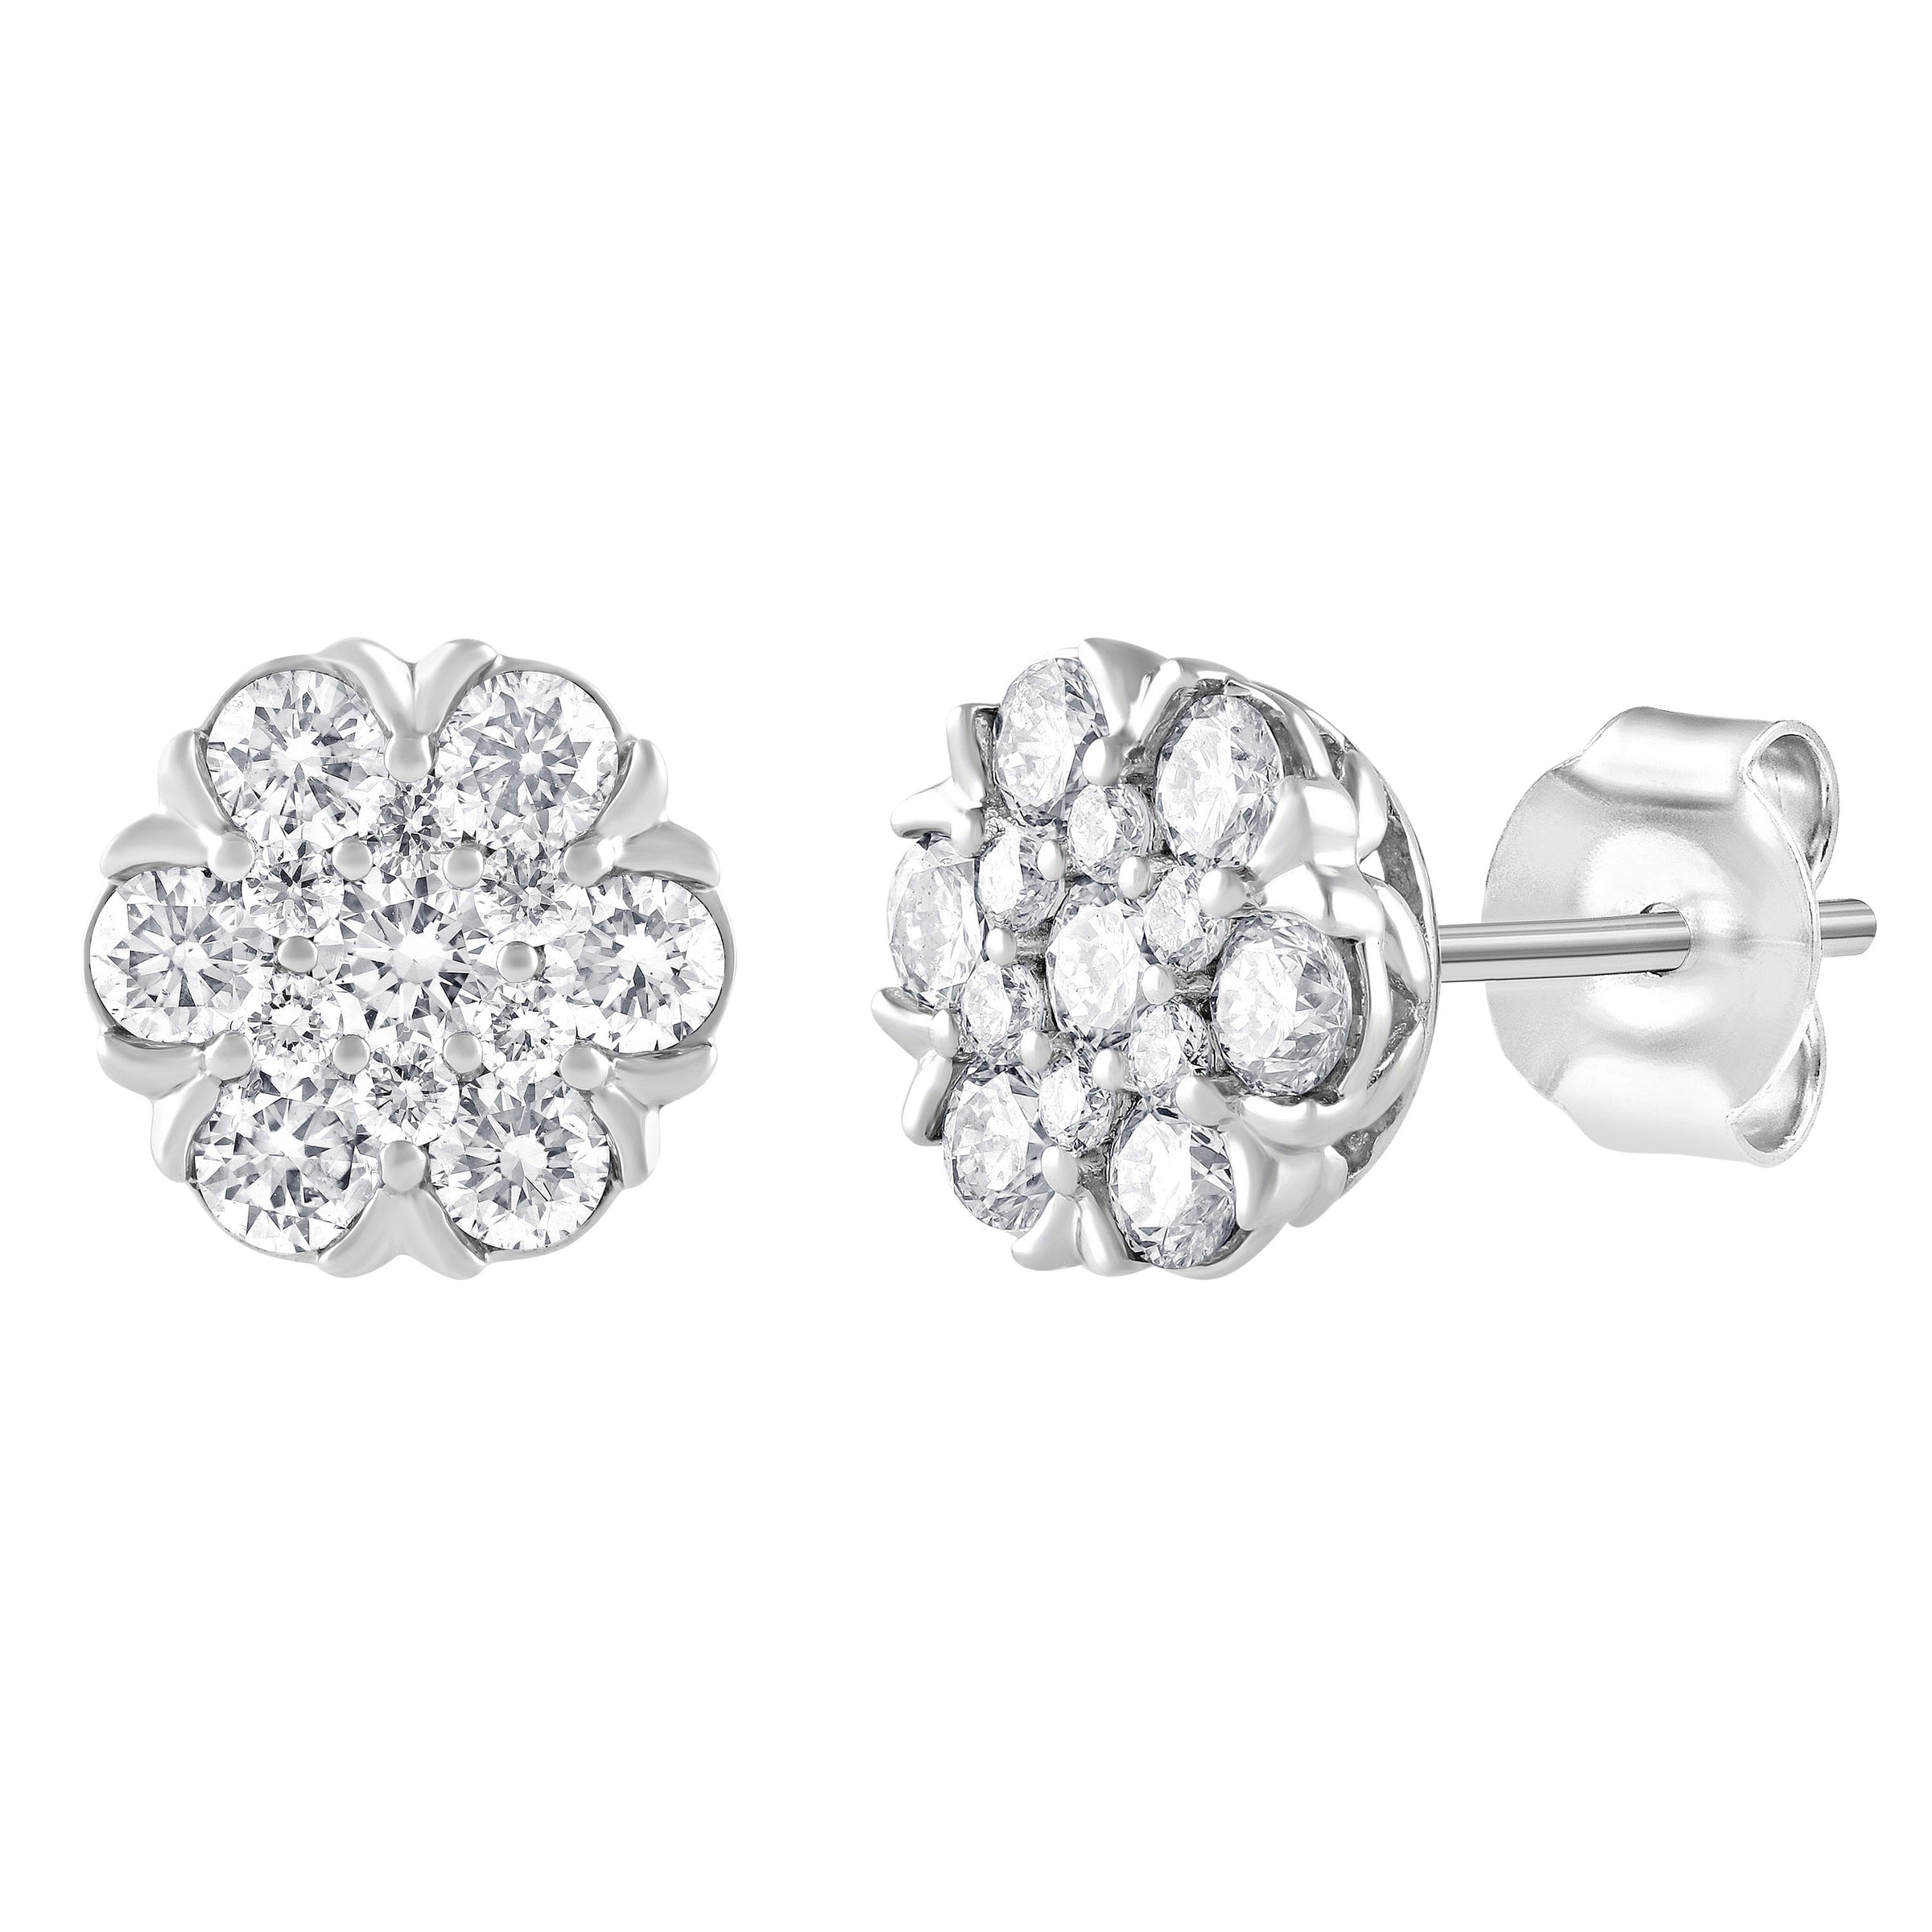 Meera Cluster Stud Earrings with 1.00ct of Laboratory Grown Diamonds in 9ct White Gold Earrings Bevilles 